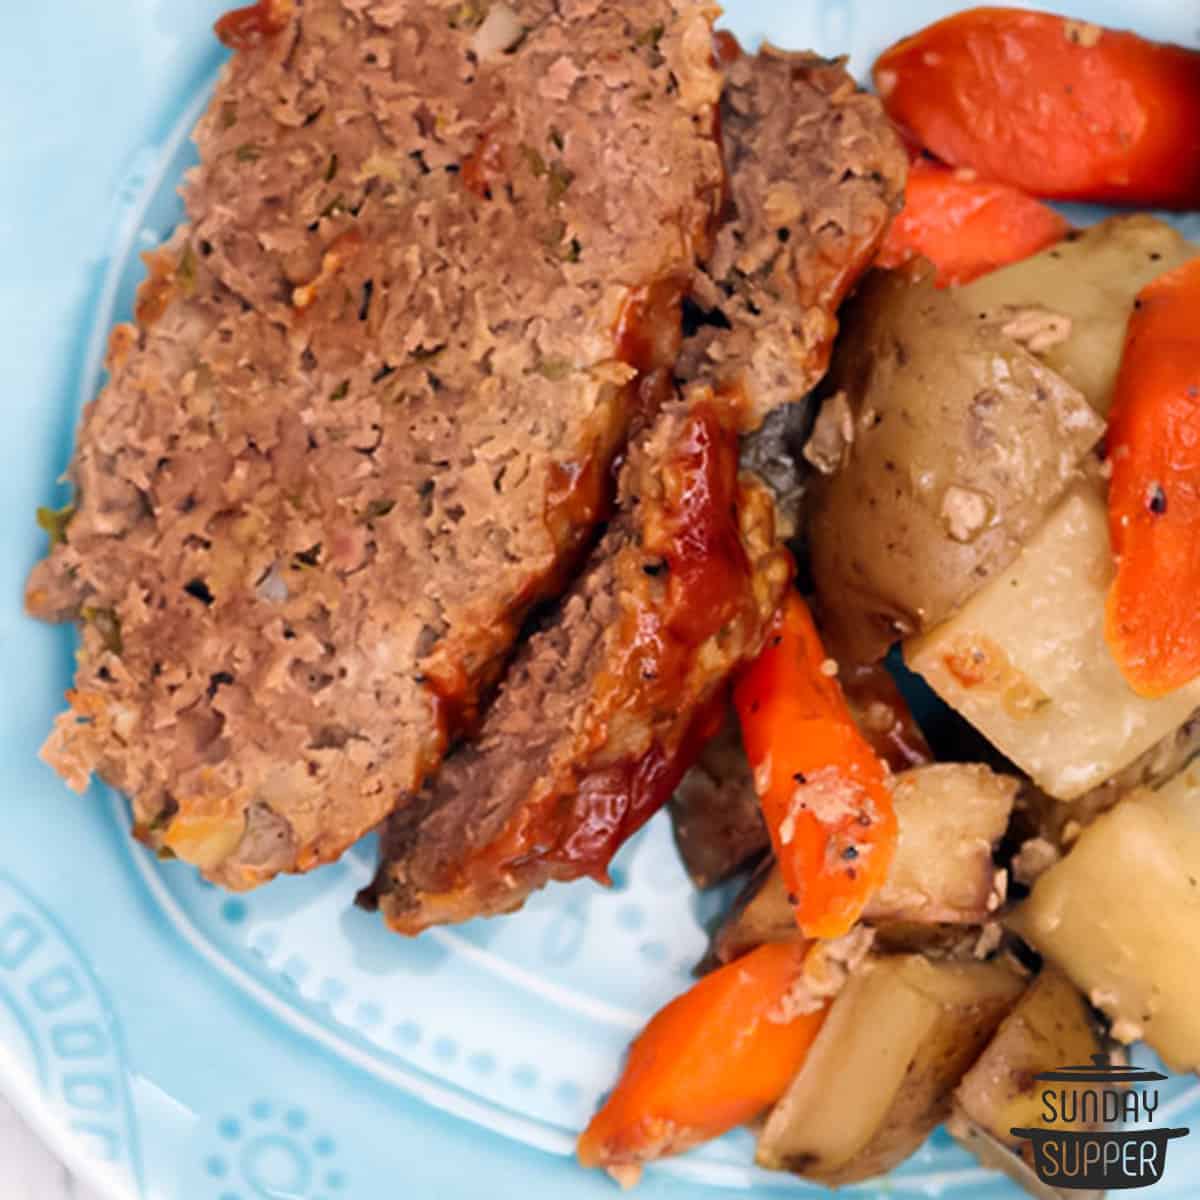 a closeup of two slices of meatloaf and slow cooked vegetables on a plate